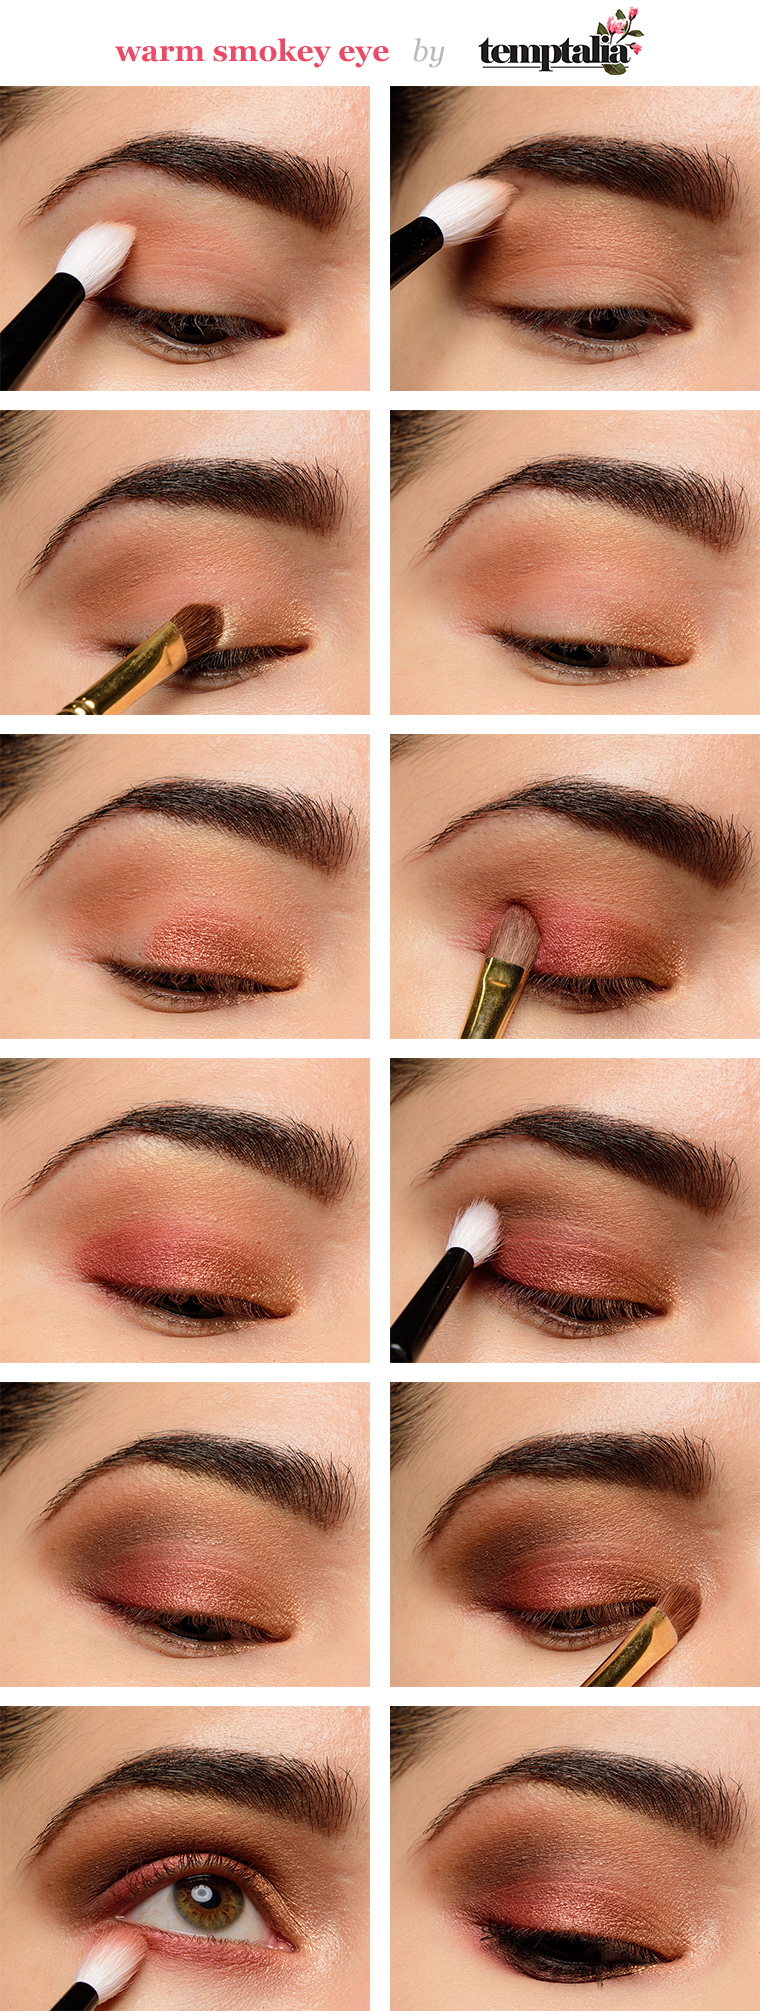 Eye Makeup Tutorial For Beginners How To Apply Eyeshadow Smokey Eye Makeup Tutorial For Beginners